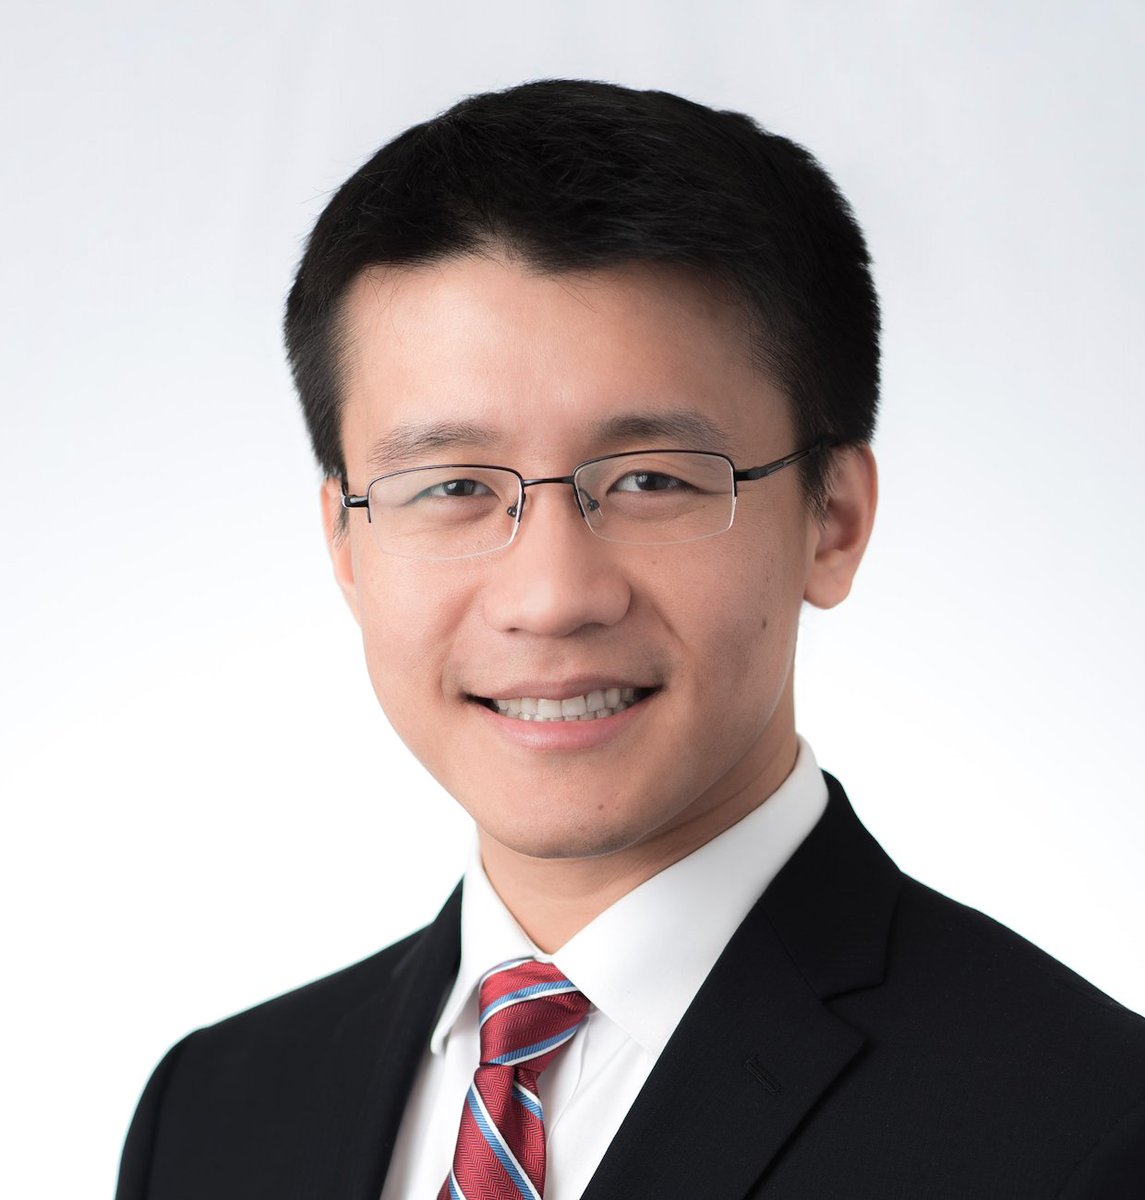 Congratulations to Dr. Heiko Yang, a recipient of the Urology Care Foundation Research Award of Distinction! 2024 Outstanding Graduate Scholar Award! 🎉 @HeikoYangMDPhD #MarshallStoller @thomaschi8 @UrologyCareFdn auanet.org/about-us/media…